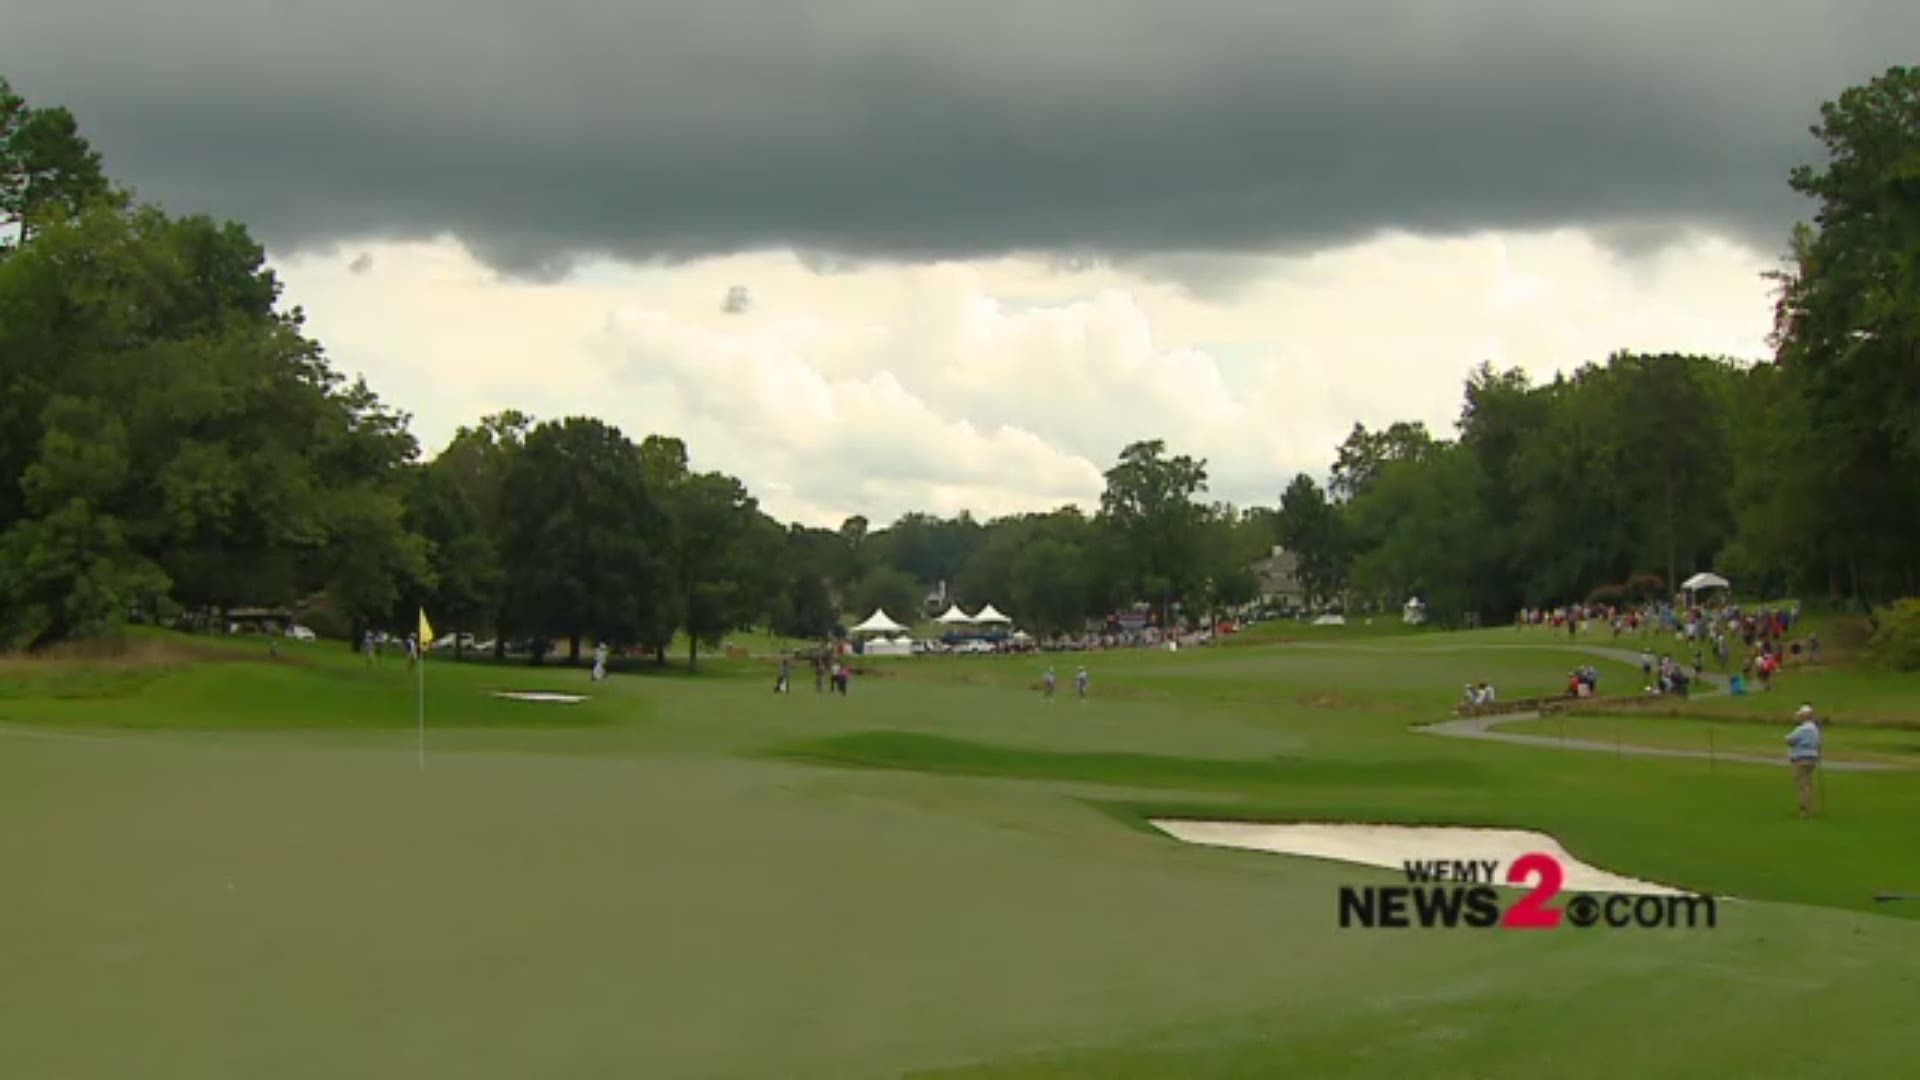 Play has been suspended at the Wyndham due to weather.